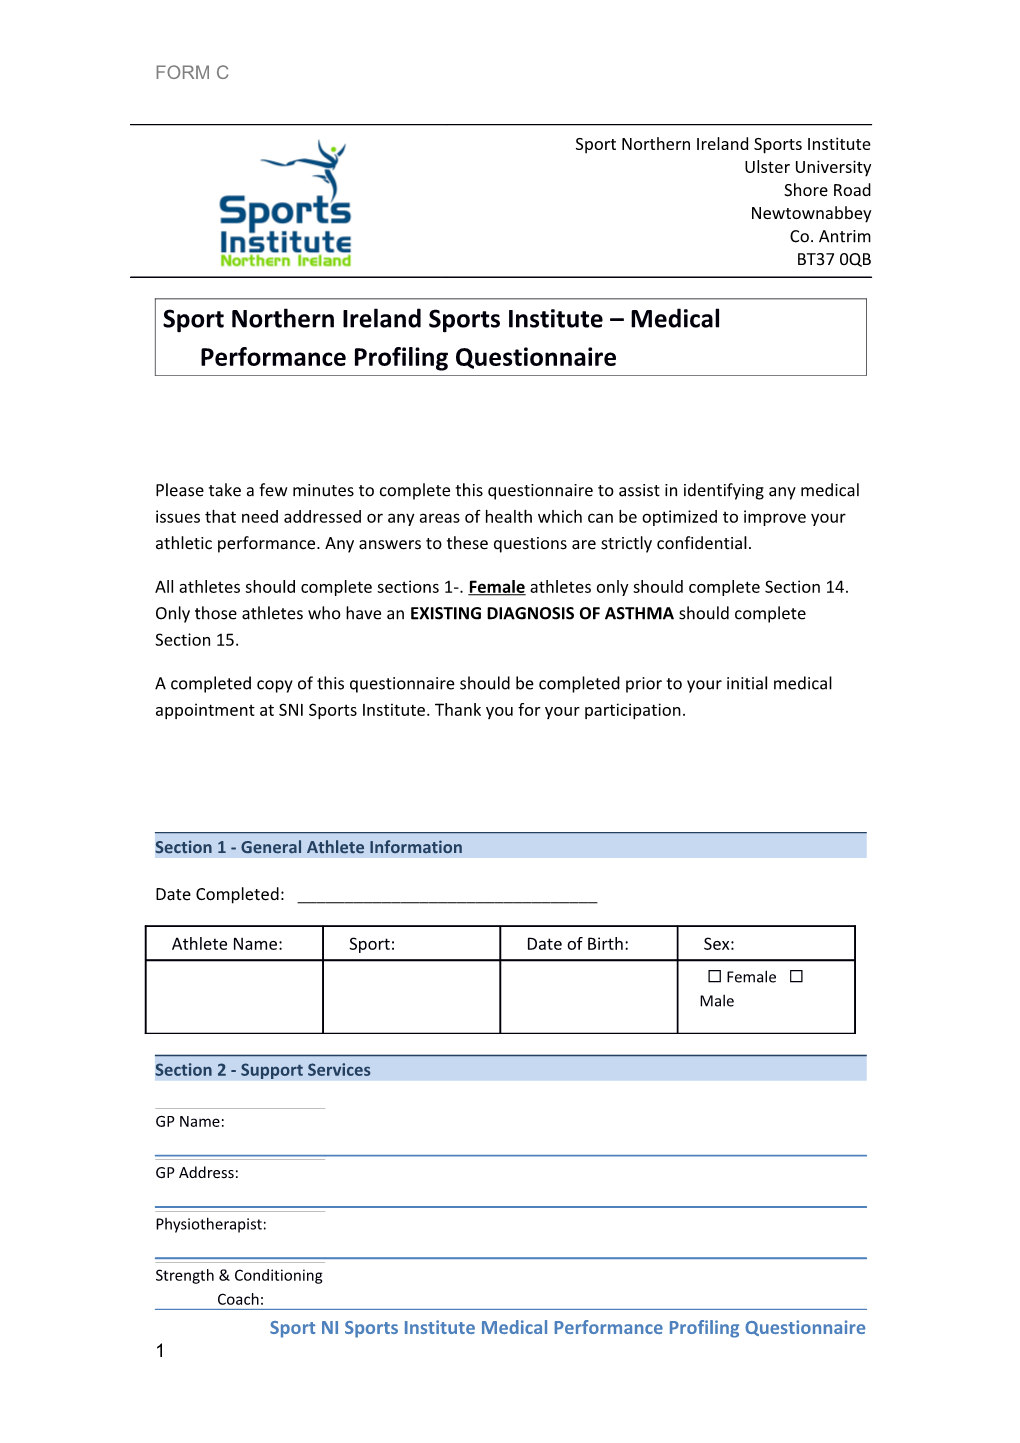 Sport NI Sports Institute Medical Performance Profiling Questionnaire